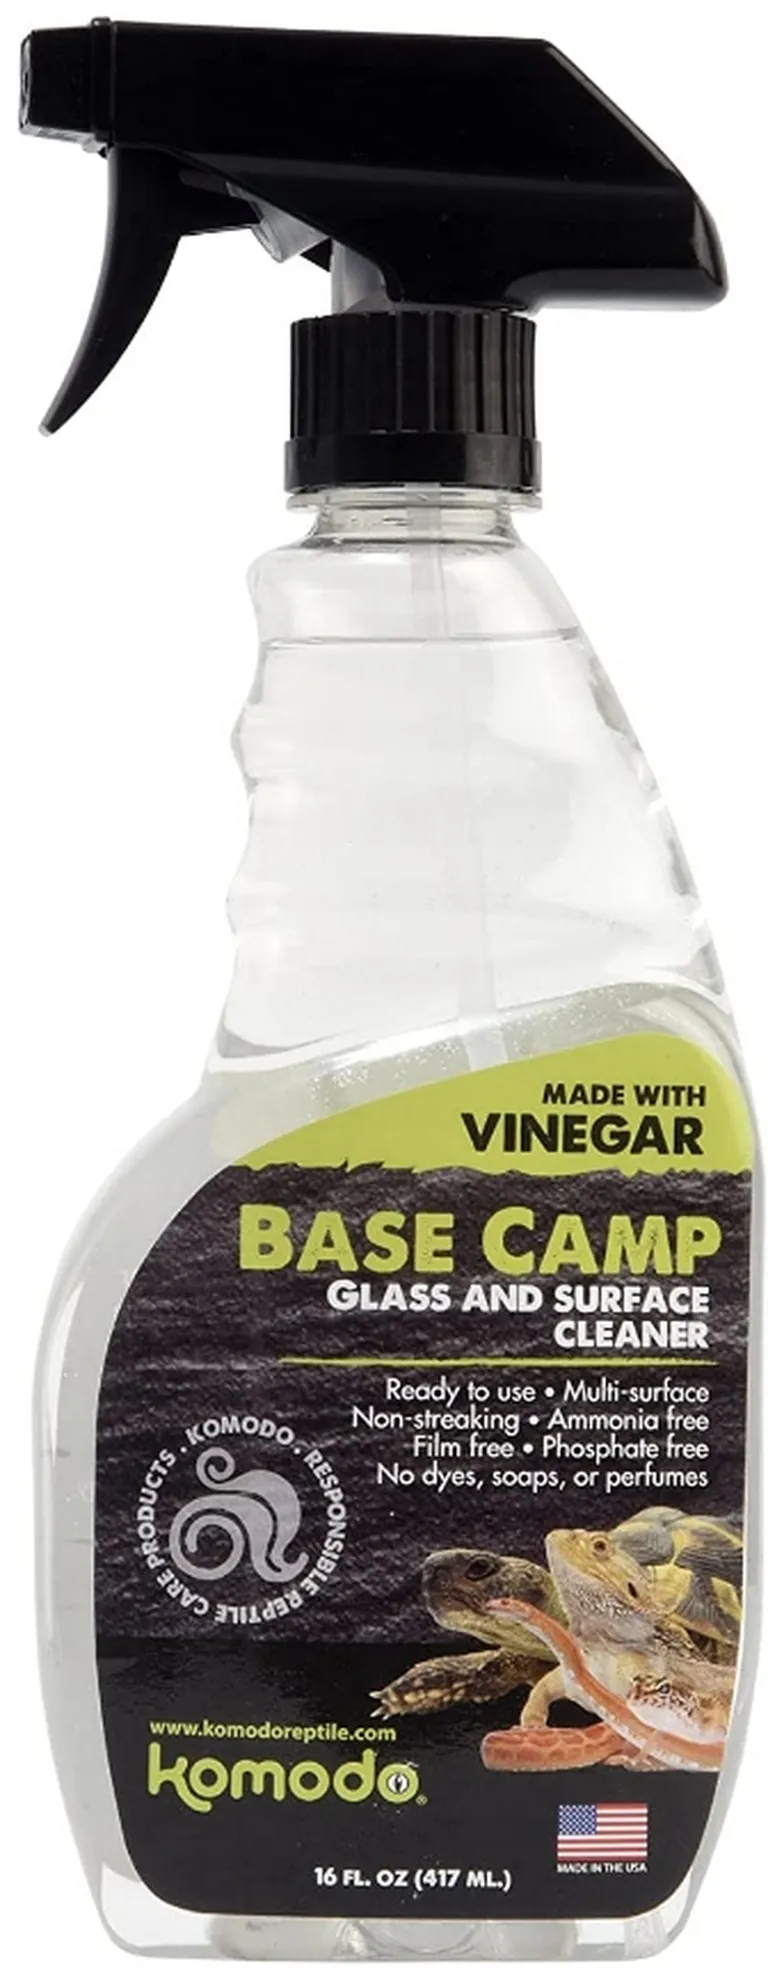 Komodo Base Camp Glass and Surface Cleaner Photo 3